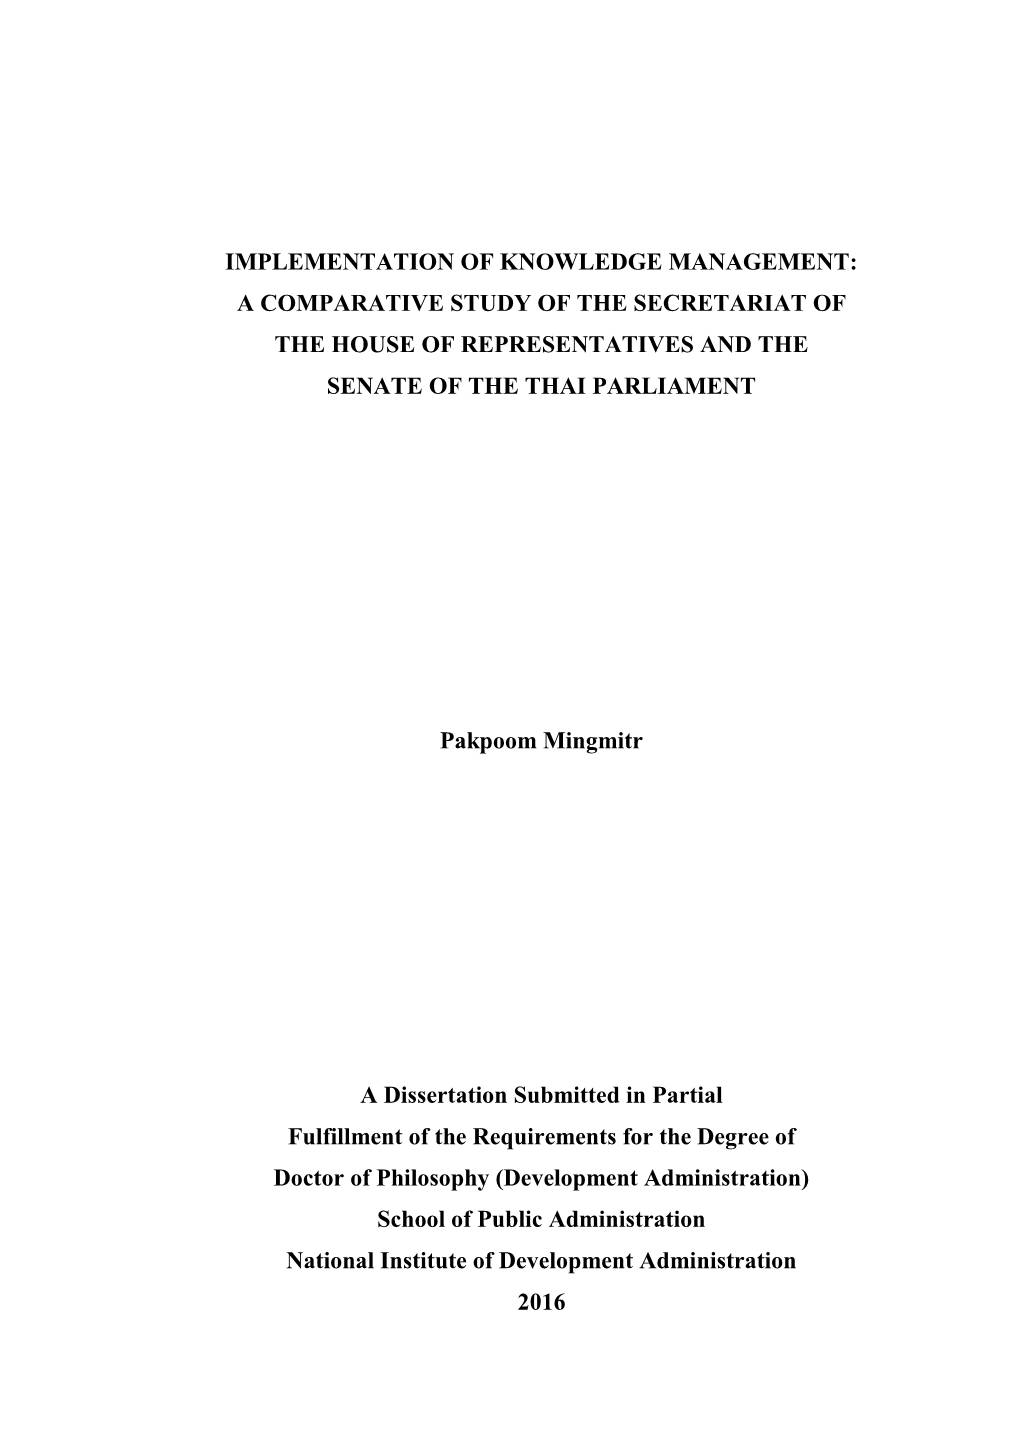 Implementation of Knowledge Management: a Comparative Study of the Secretariat of the House of Representatives and the Senate of the Thai Parliament